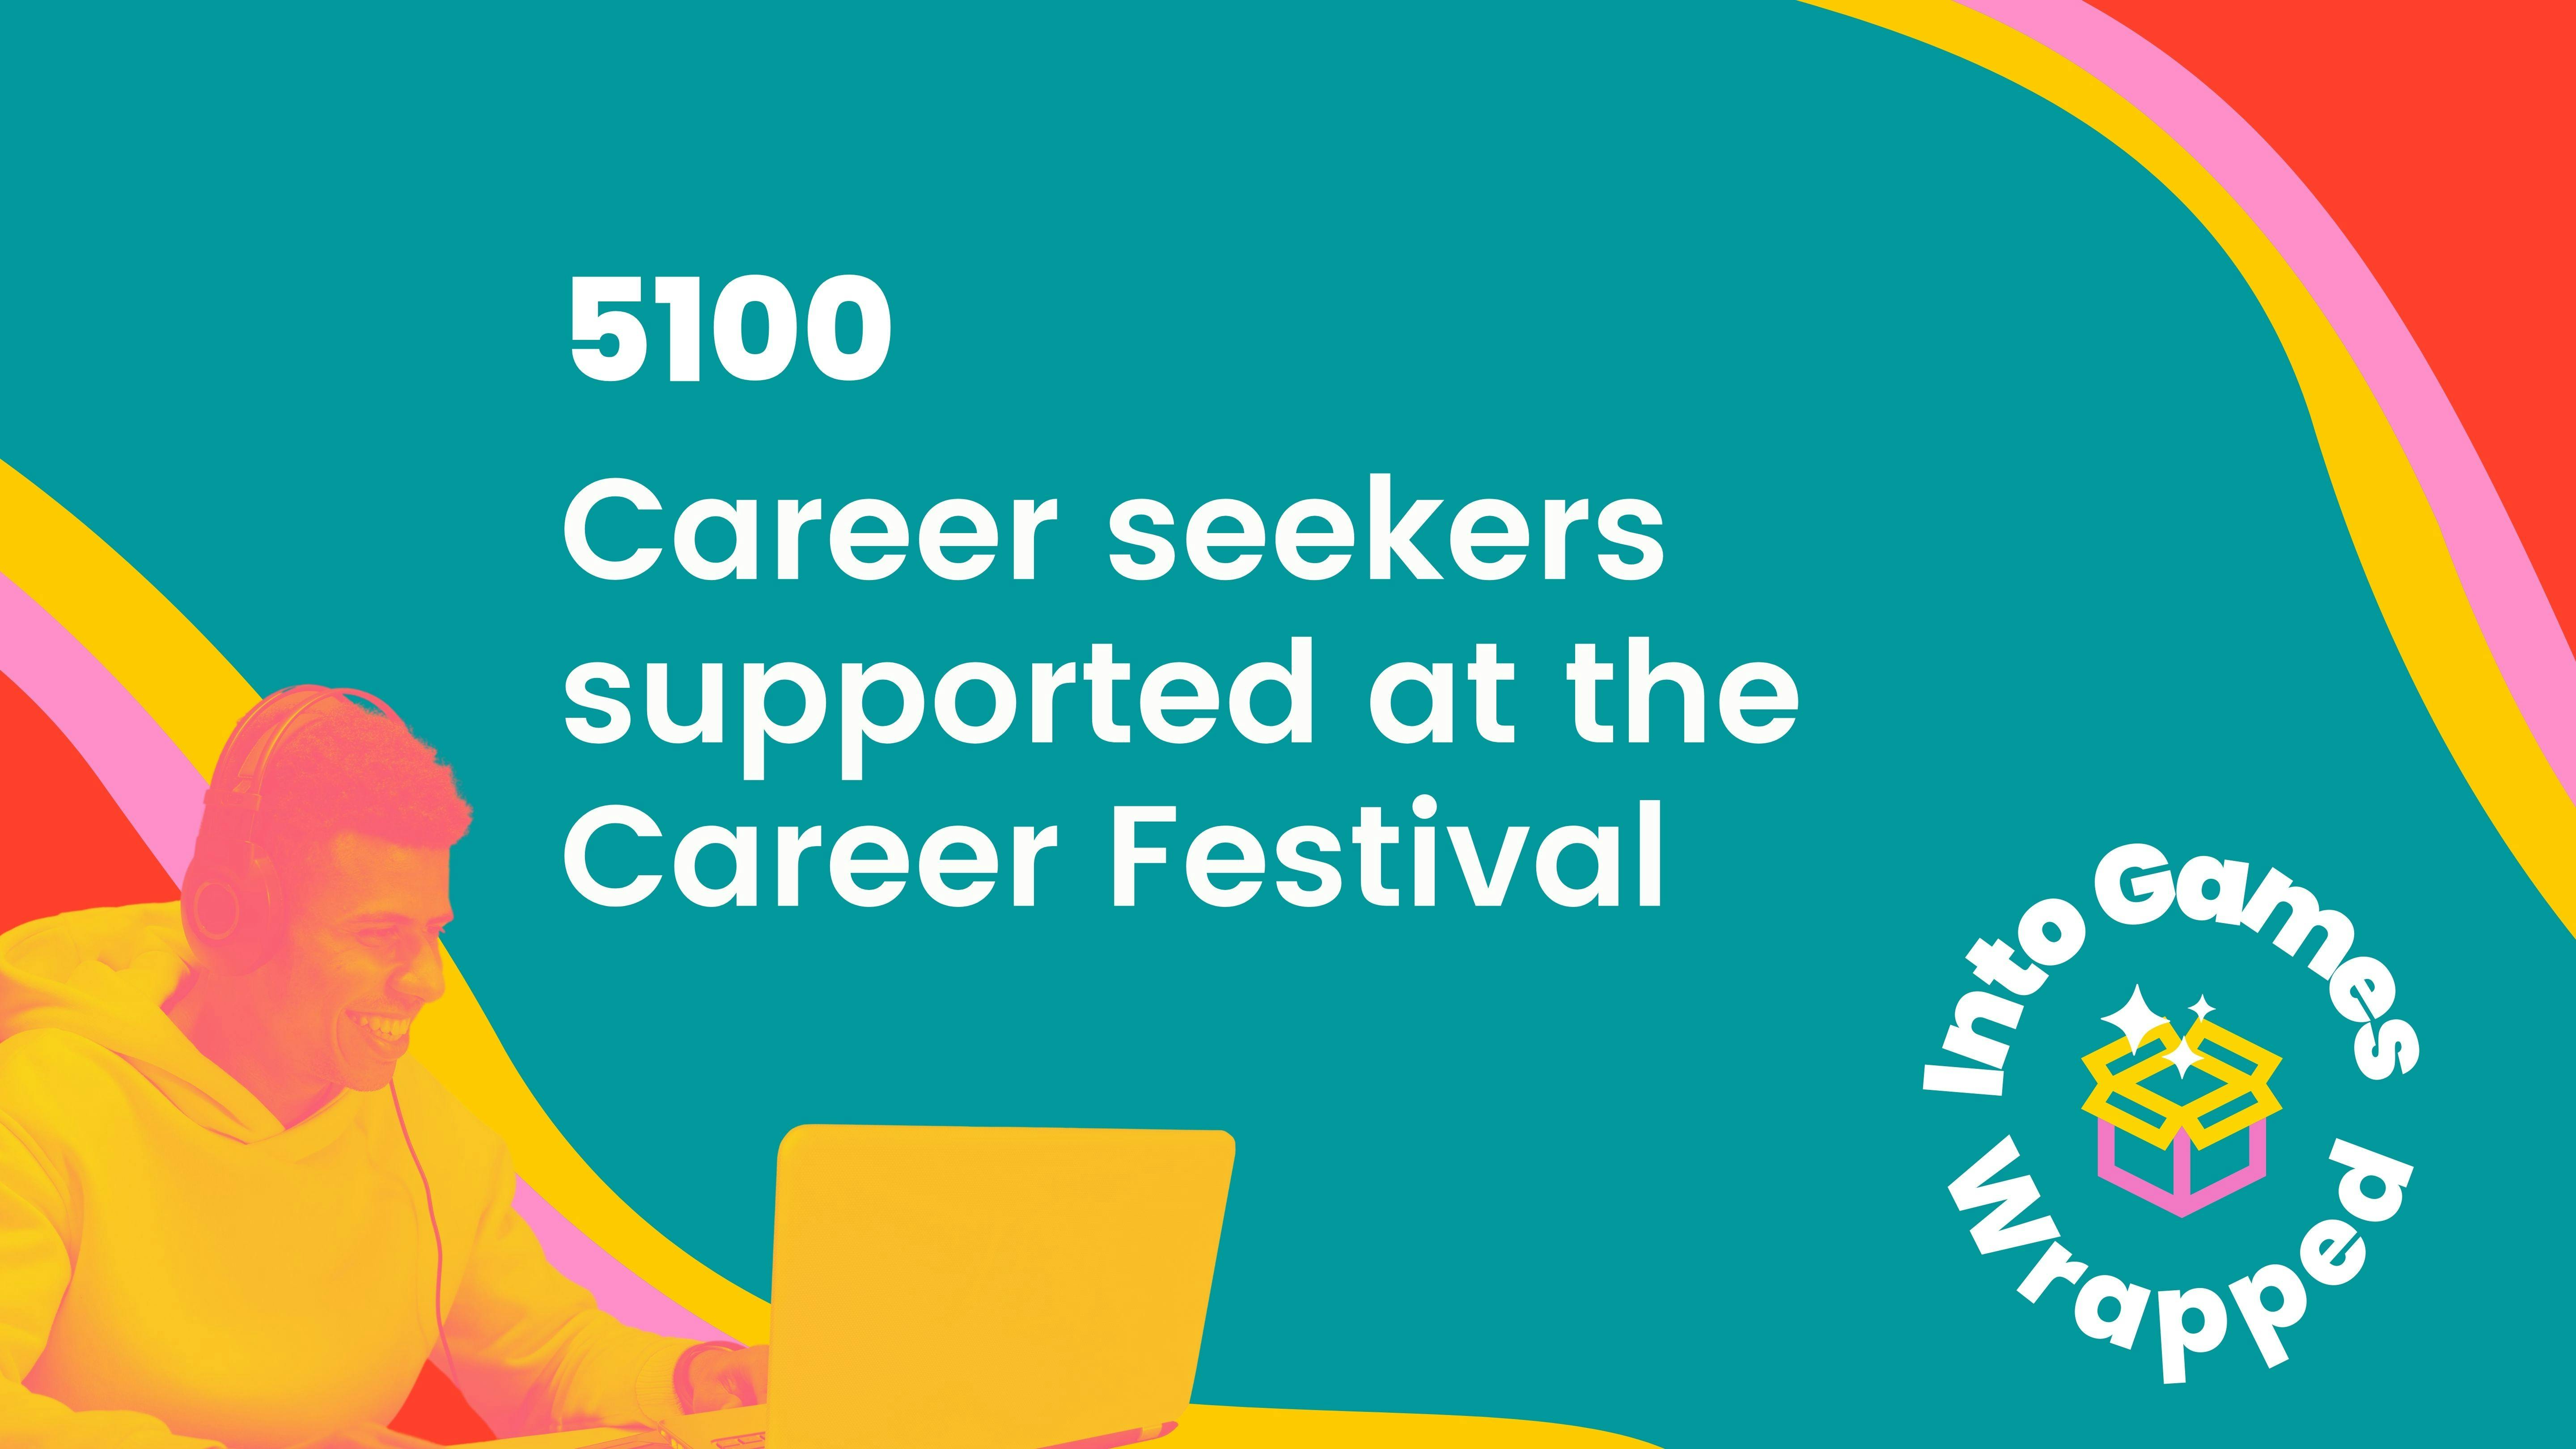 5100 career seekers supported at Career Festival